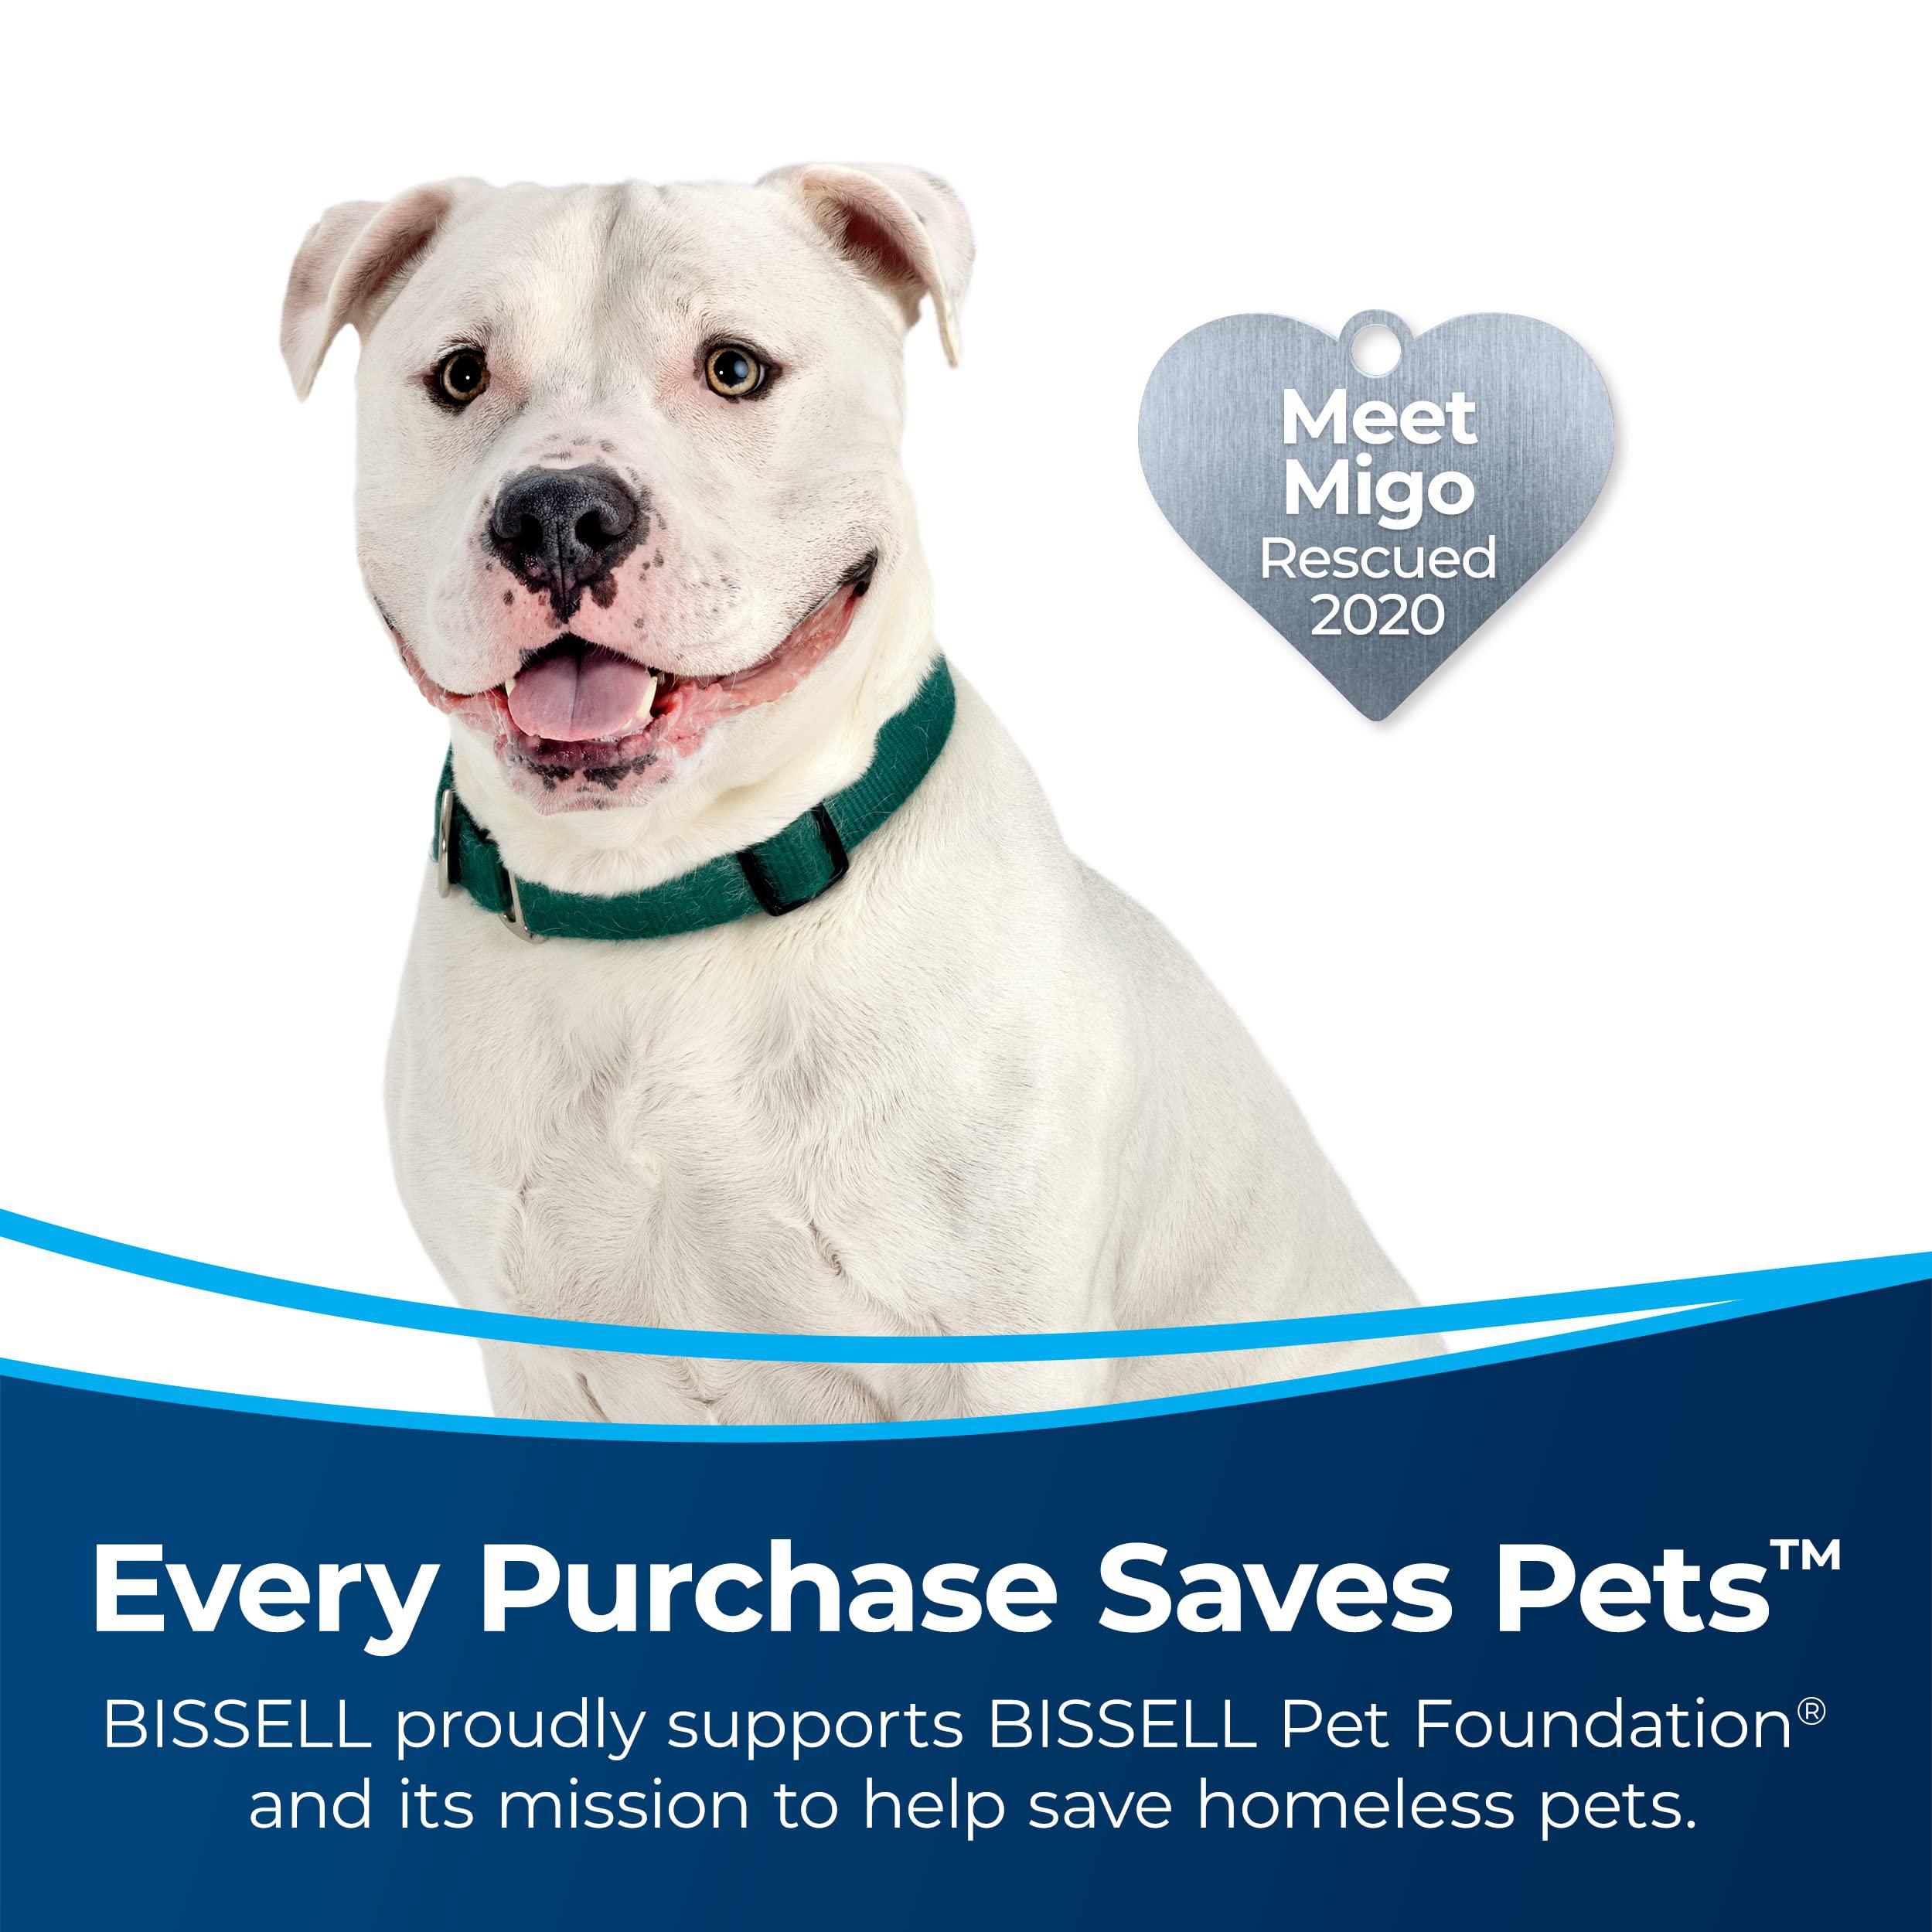 bissell multiclean allergen rewind pet vacuum with hepa filter sealed system, automatic cord rewind, tangle-free brush roll, 